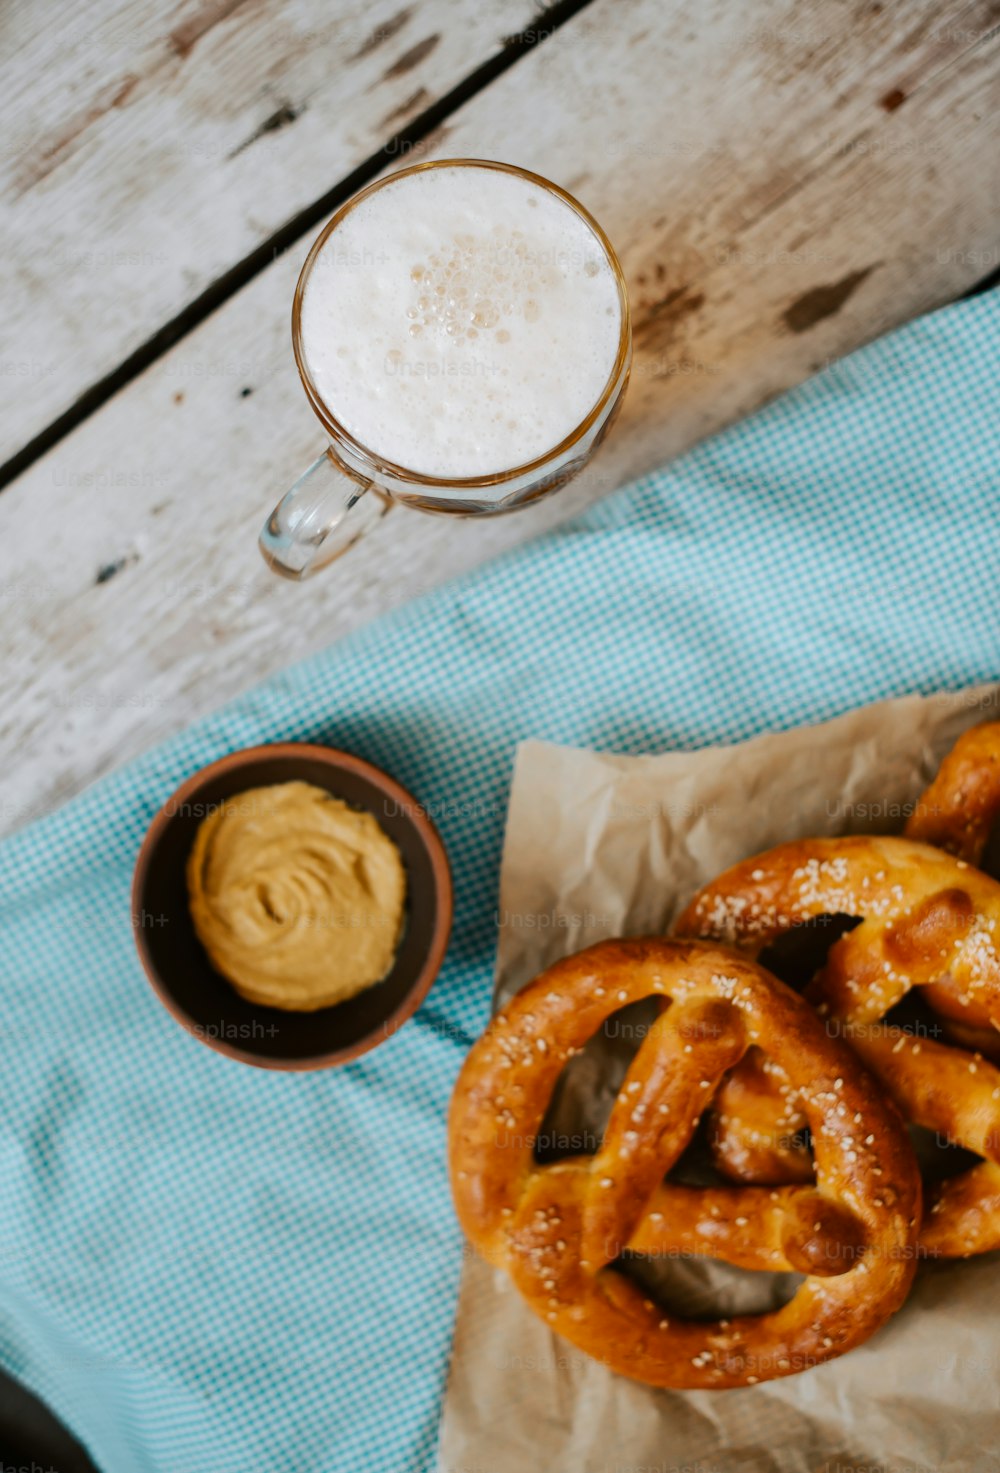 some pretzels and a cup of beer on a table